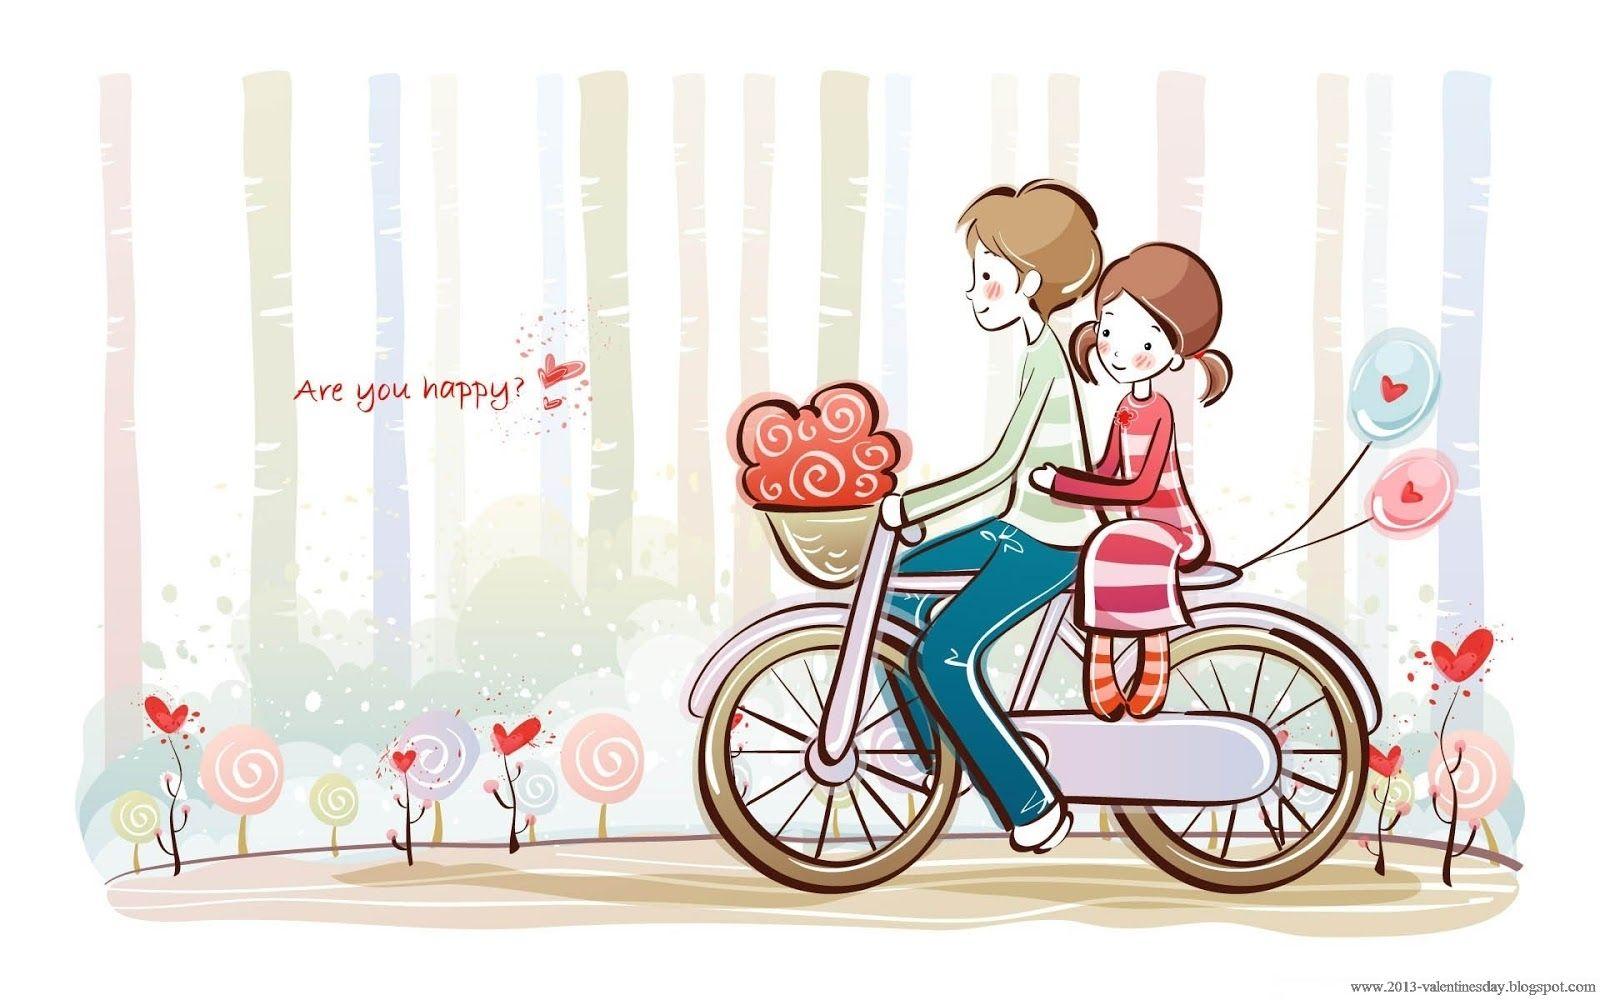 Cute Animated Love Wallpapers - Wallpaper Cave